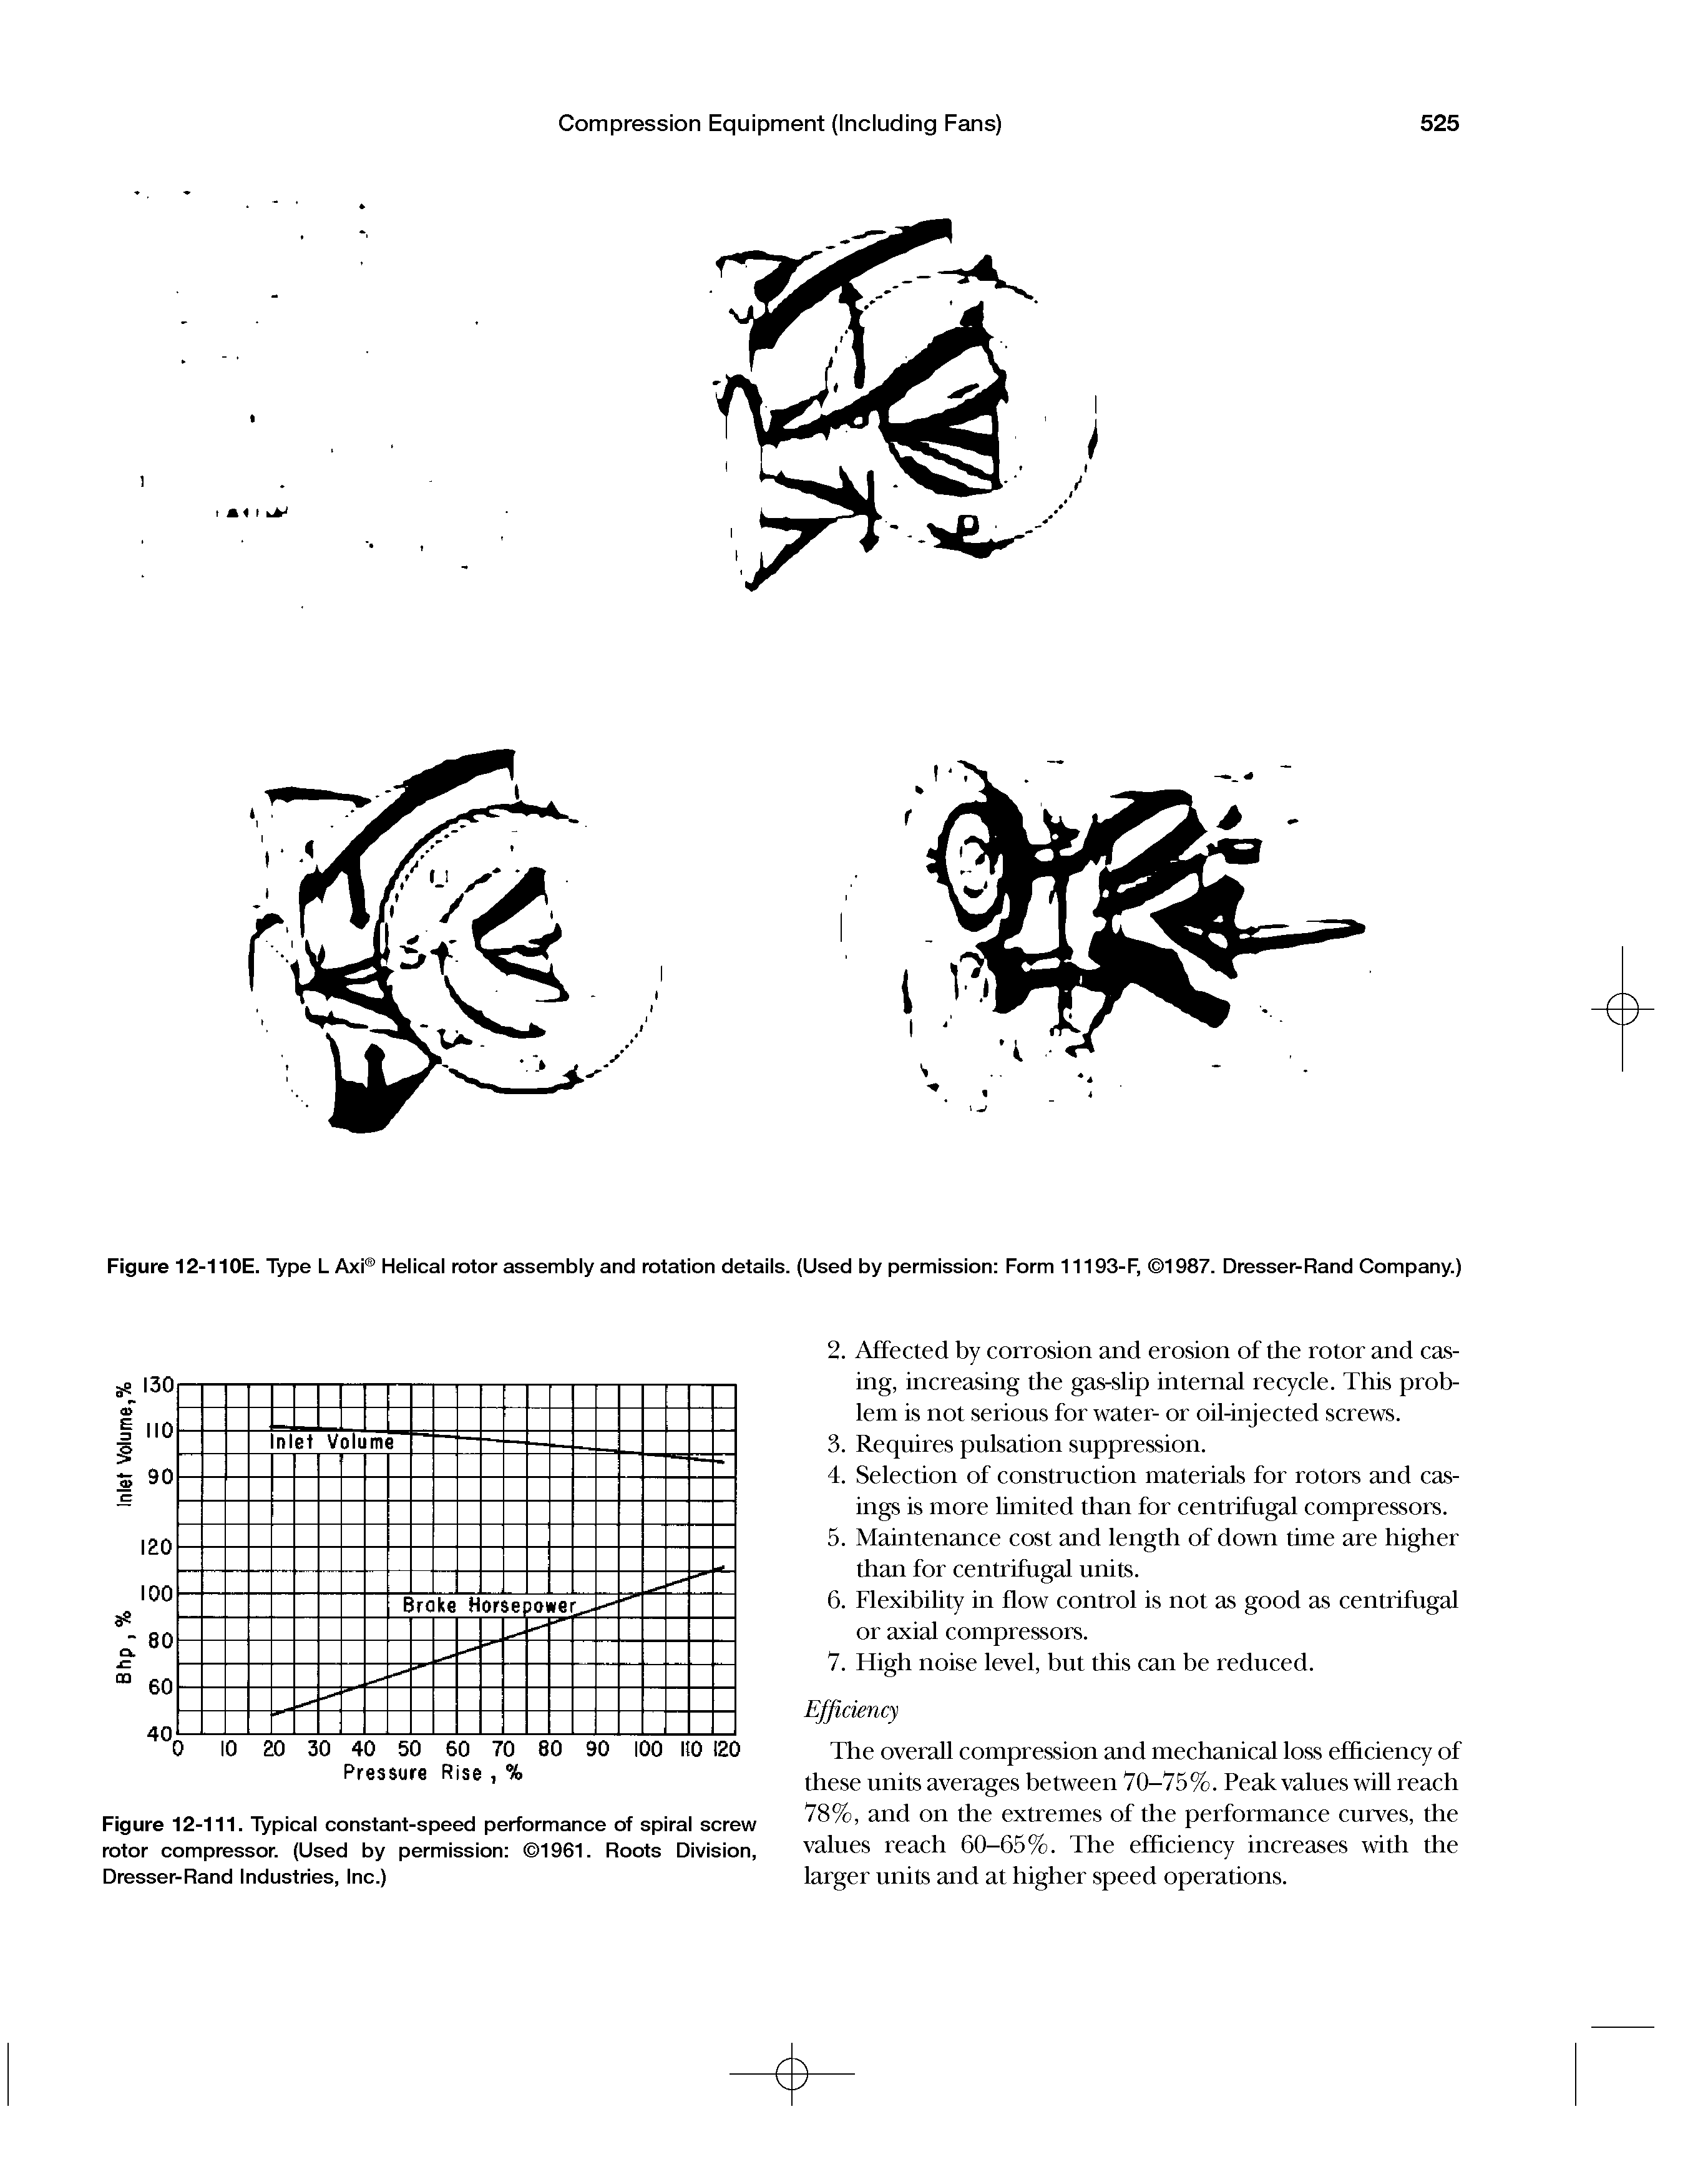 Figure 12-110E. Type L Axi Helical rotor assembly and rotation details. (Used by permission Form 11193-F, 1987. Dresser-Rand Company.)...